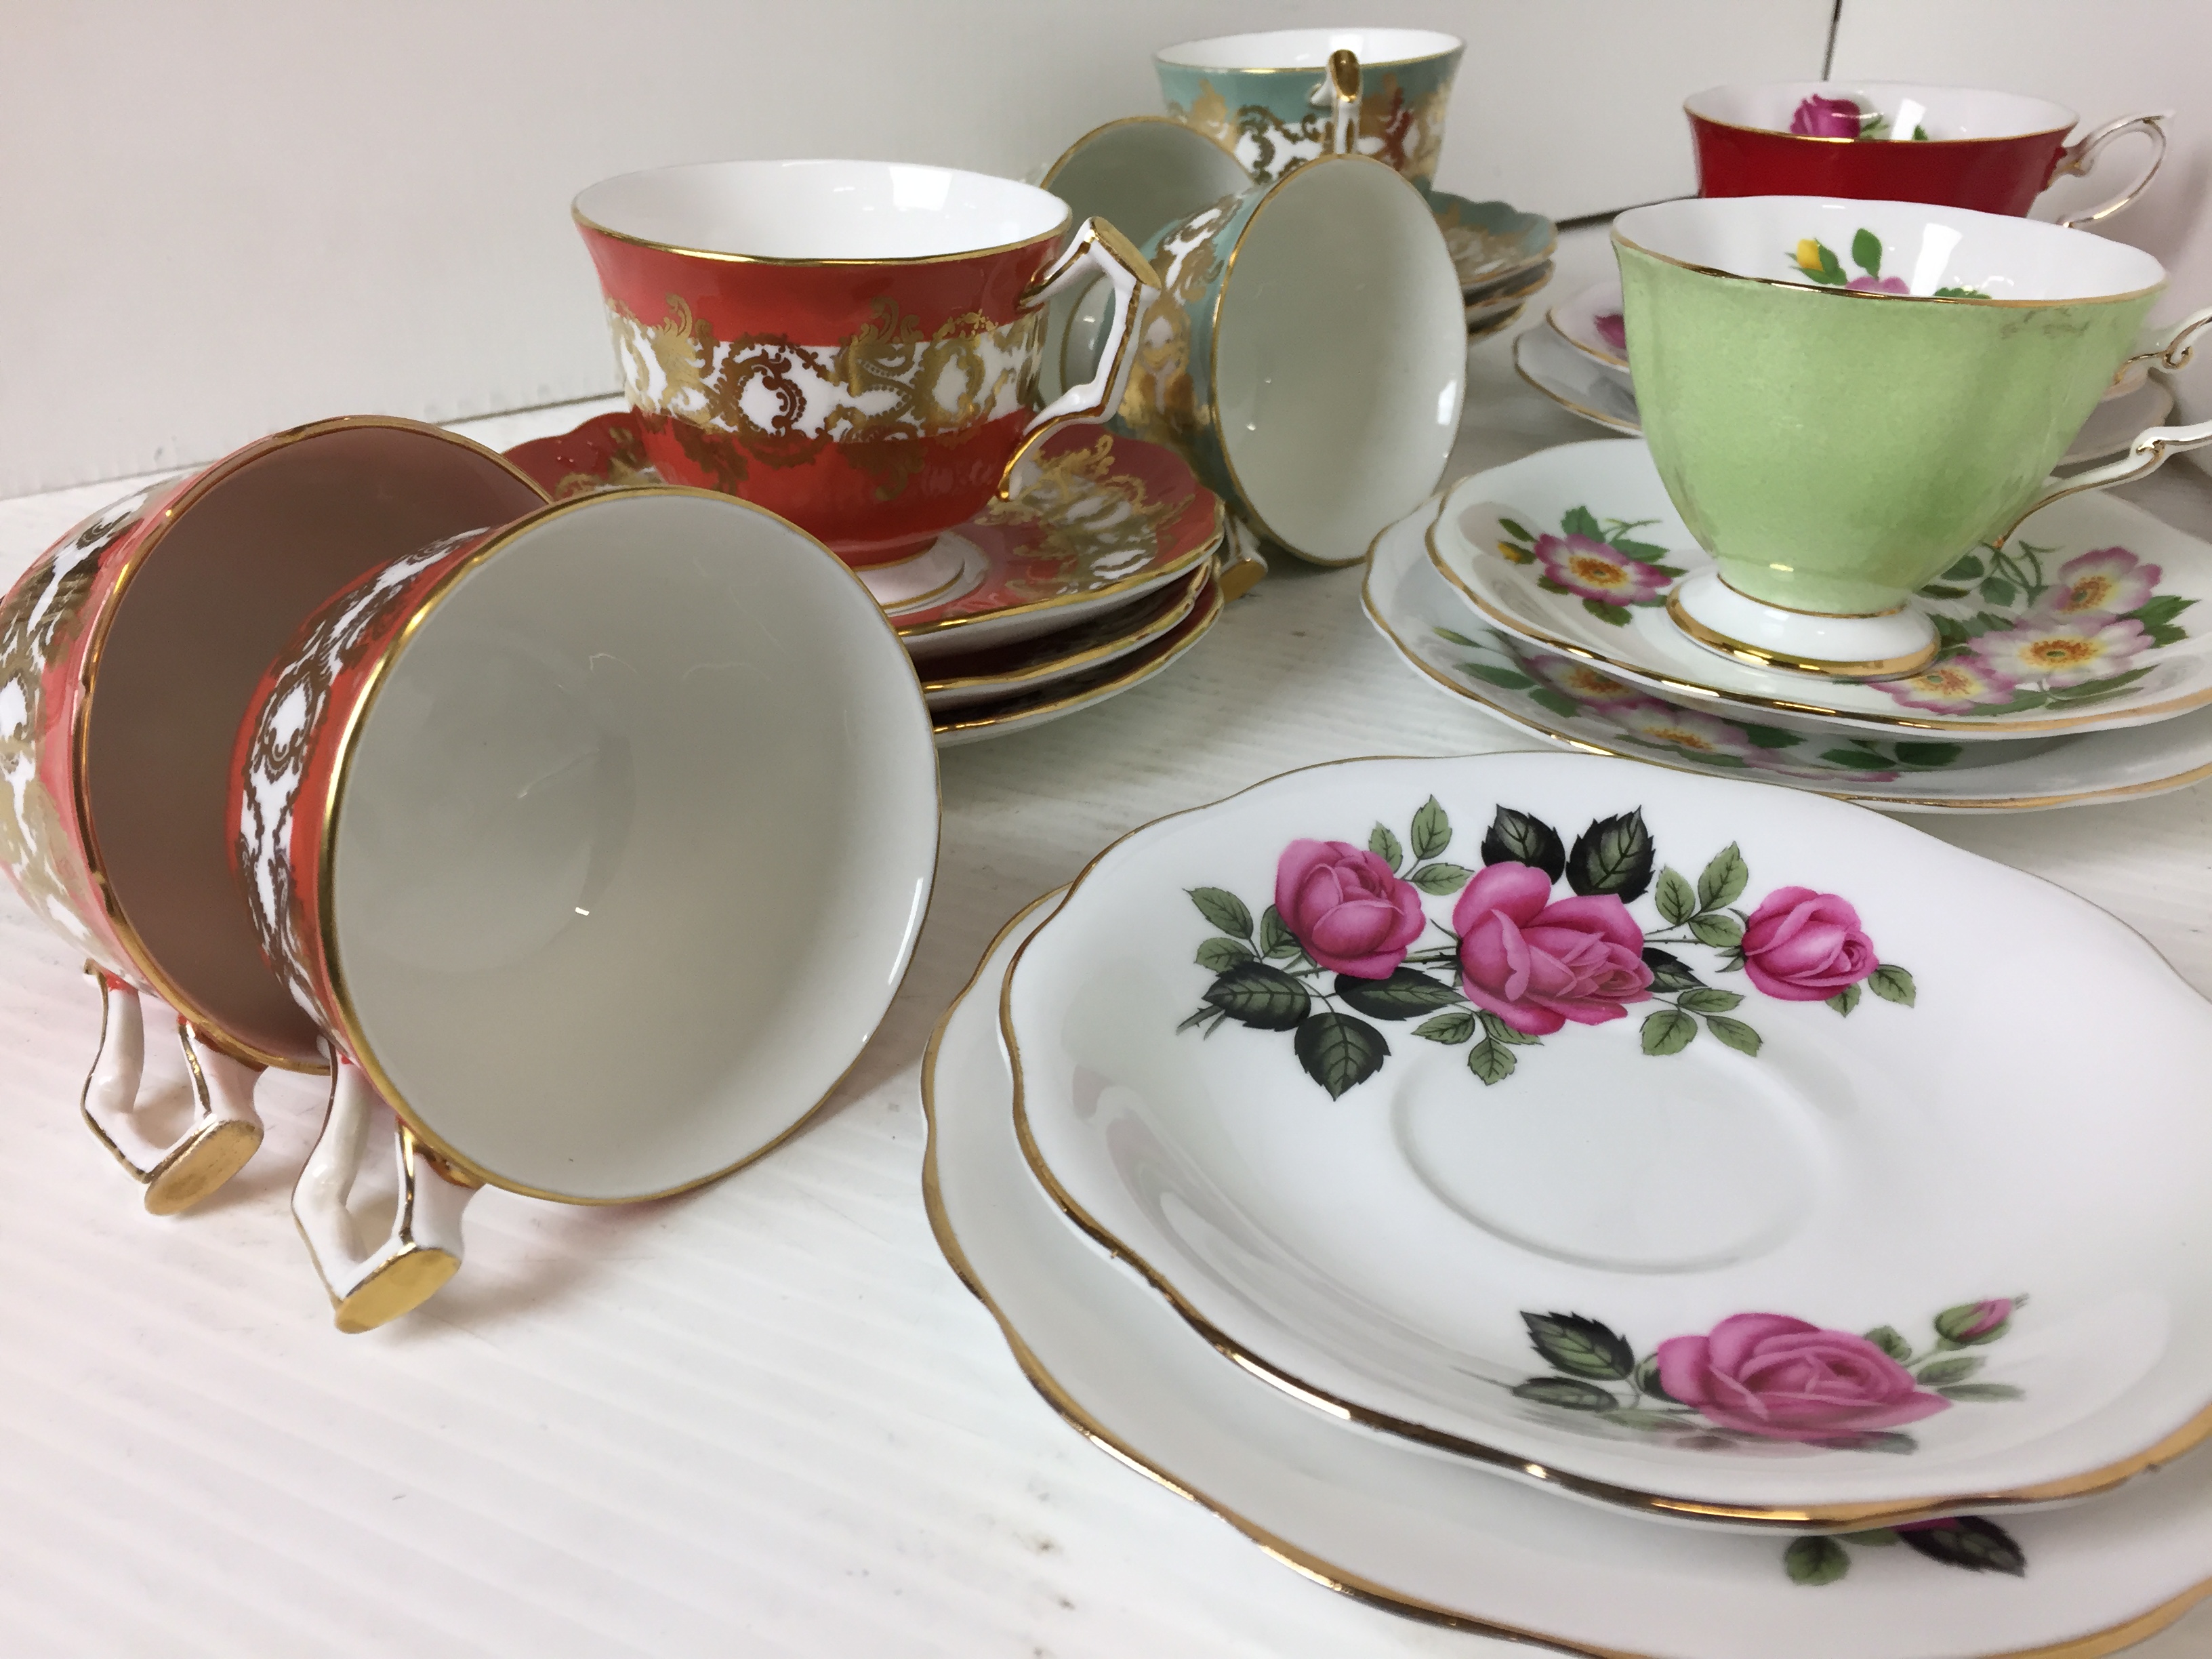 Fourteen items including six Aynsley gilt trimmed cups and saucers - three green and three salmon - Image 3 of 3